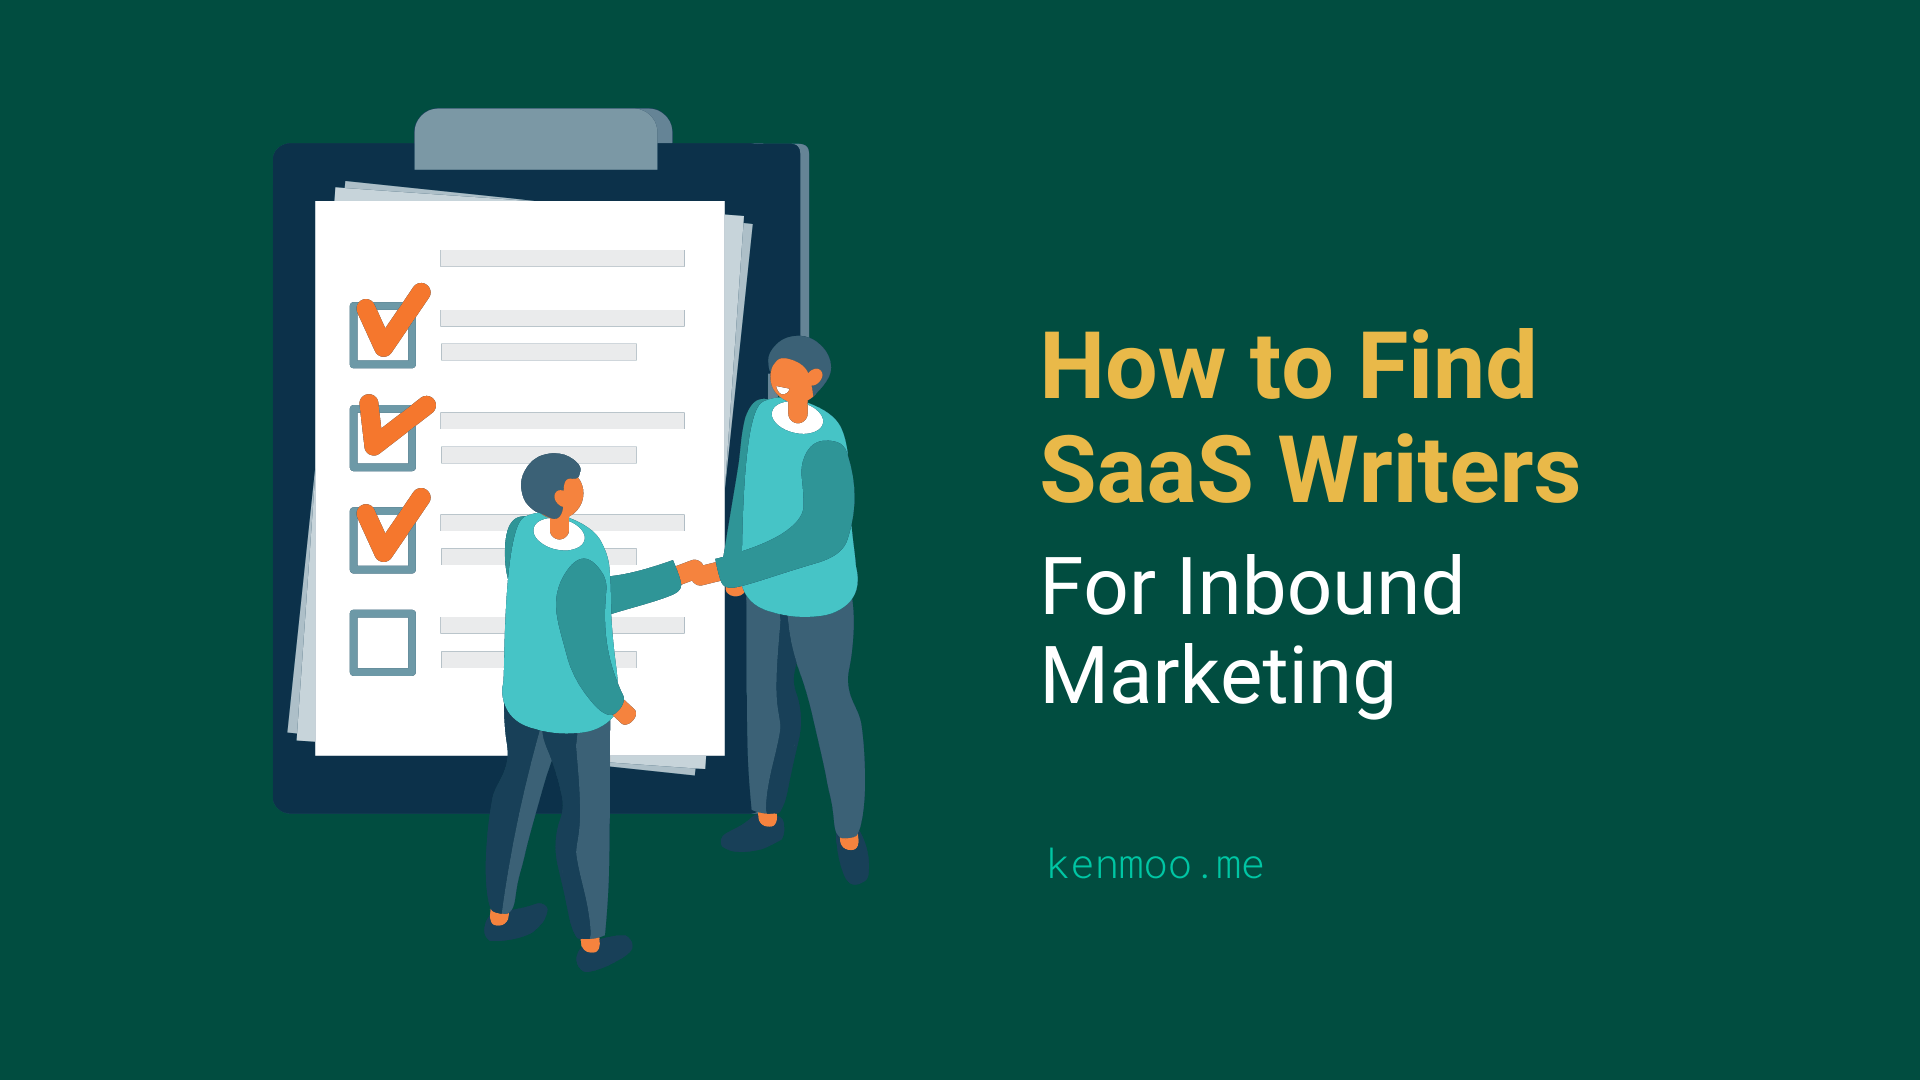 Finding Great SaaS Content Writers for Inbound Marketing